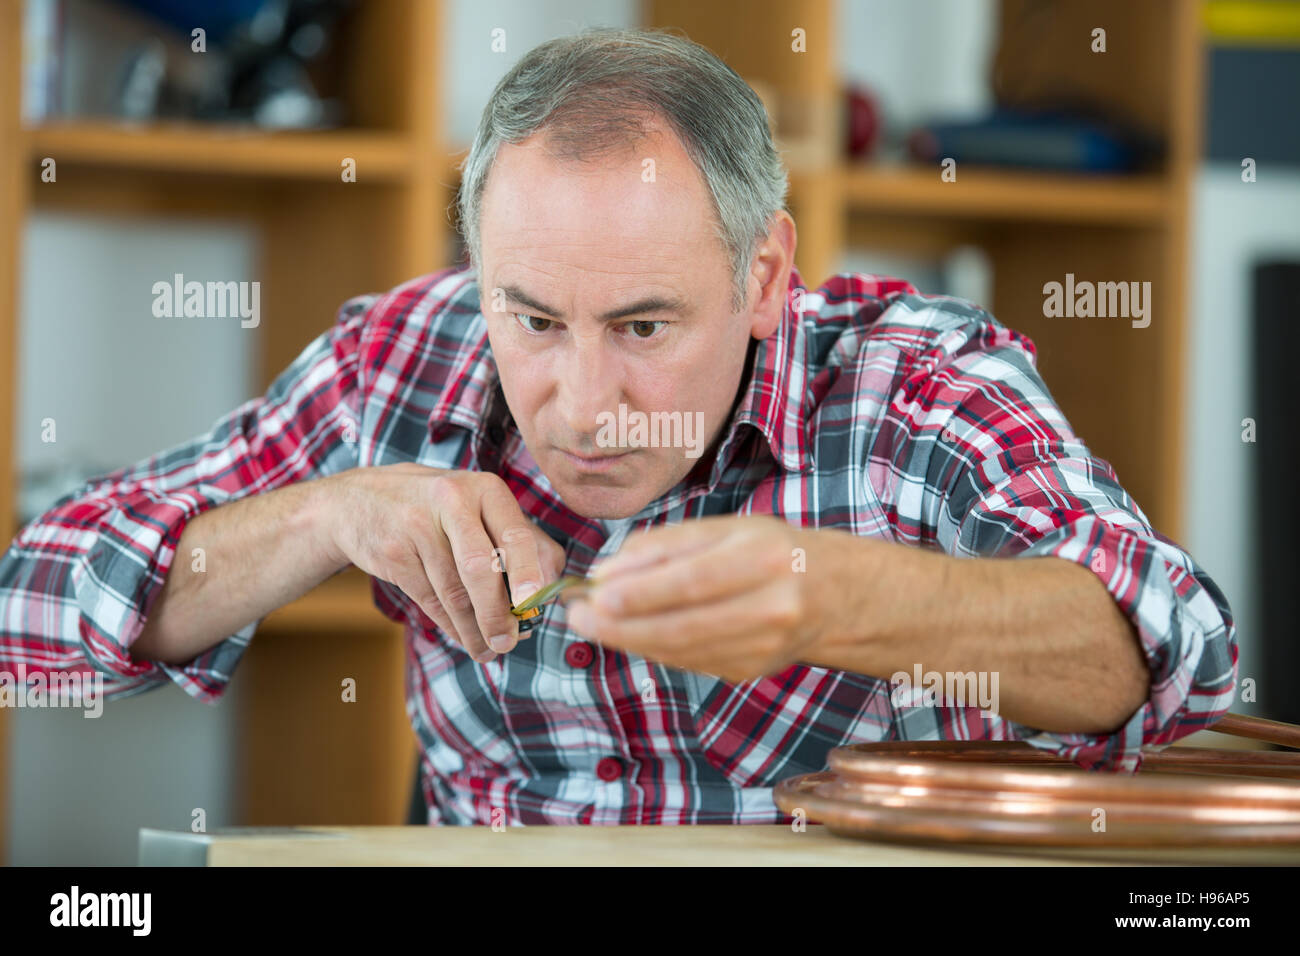 close up portrait of a middle-age watchmaker at work Stock Photo